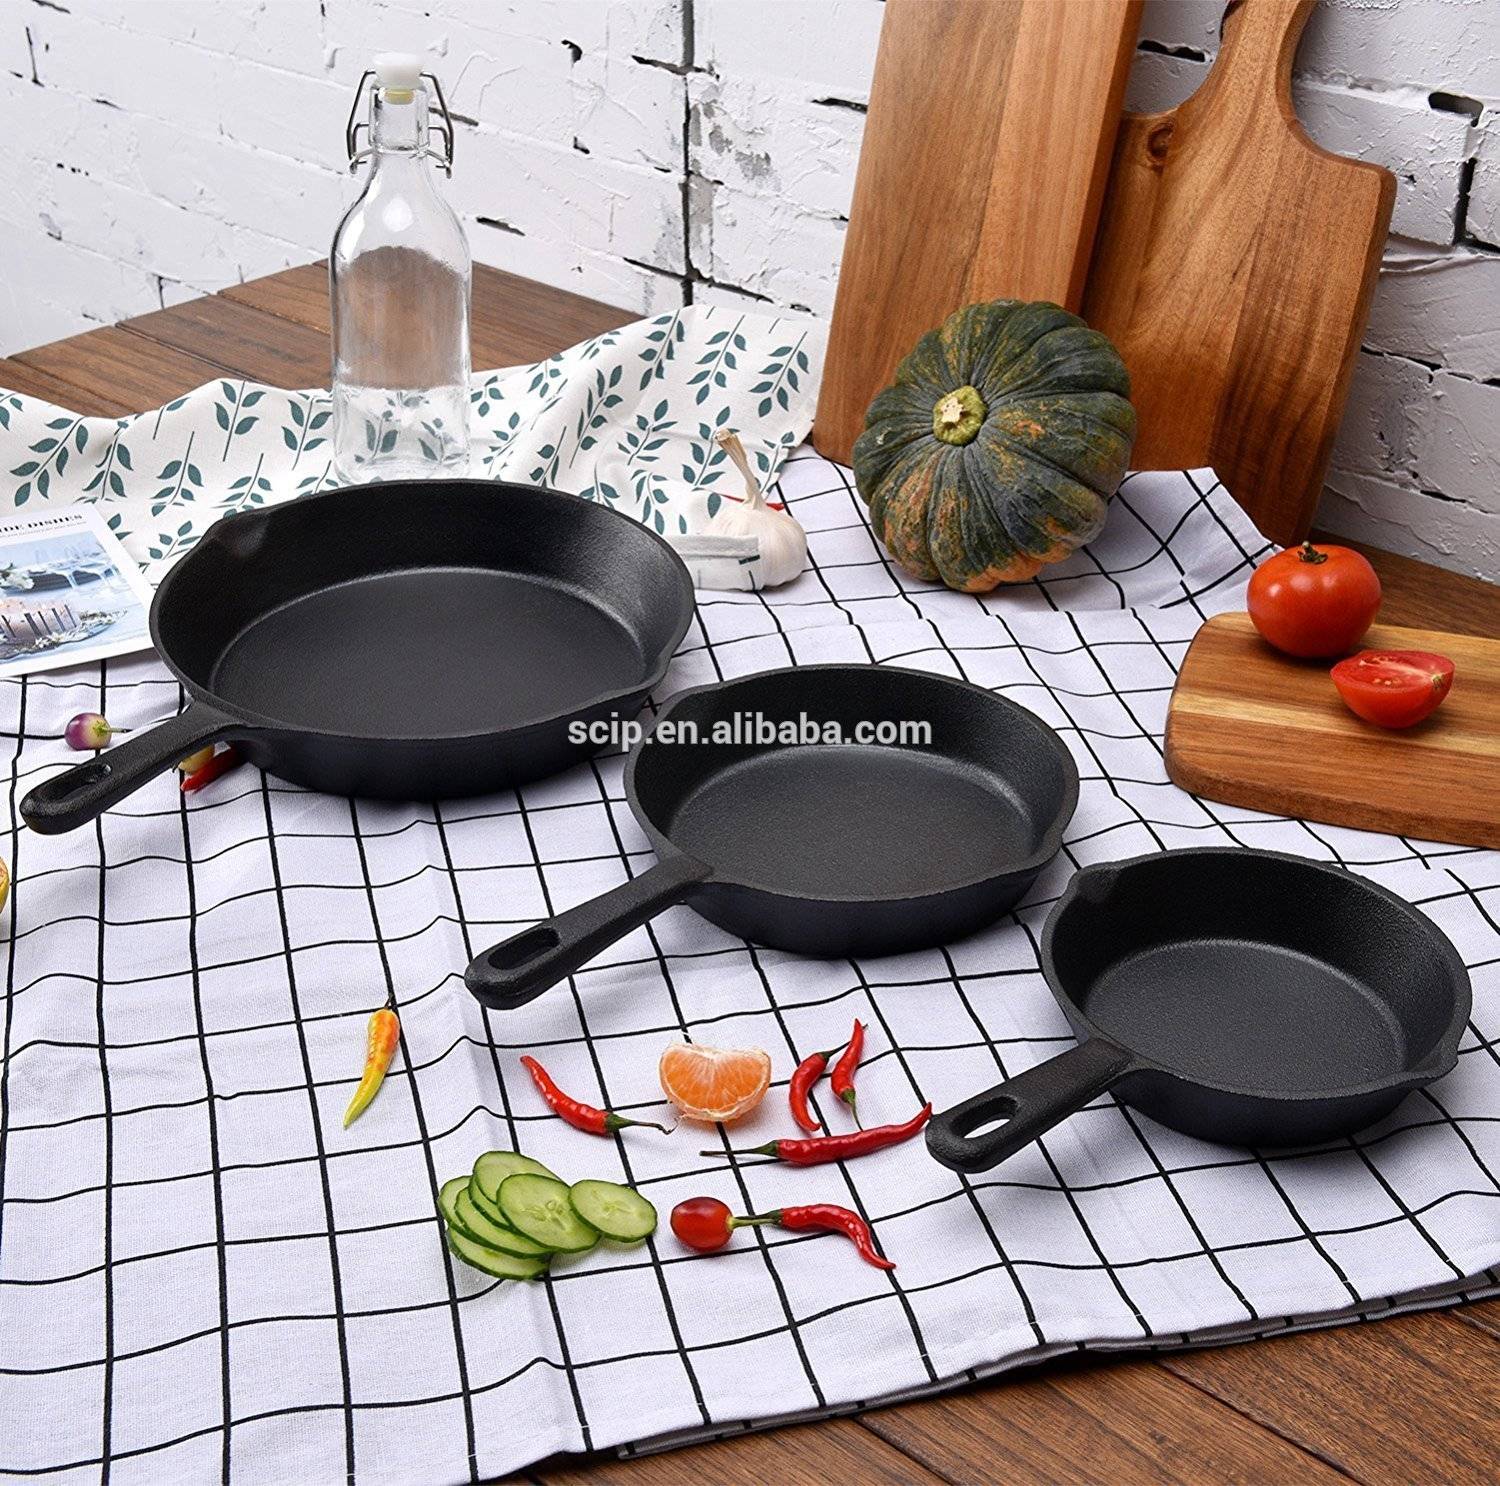 Wholesale Chinese large cast iron skillet, Pre-Seasoned ,10.5-inch